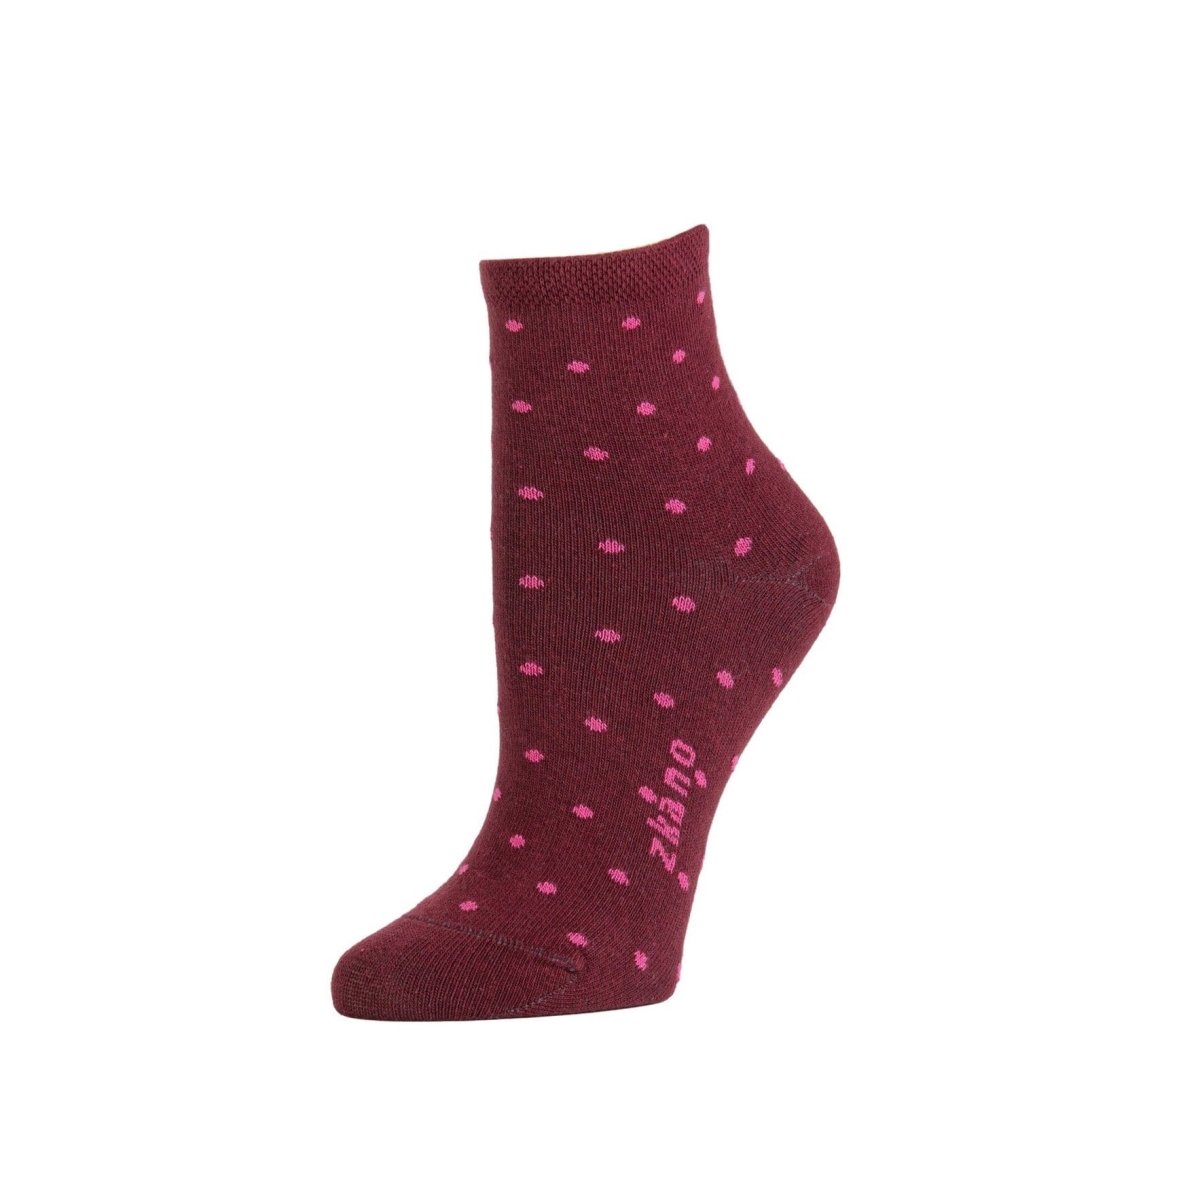 A maroon sock with bright pink polka dots with the Zkano logo along the arch. The Alice Anklet in Port is from Zkano and made in Alabama, USA.